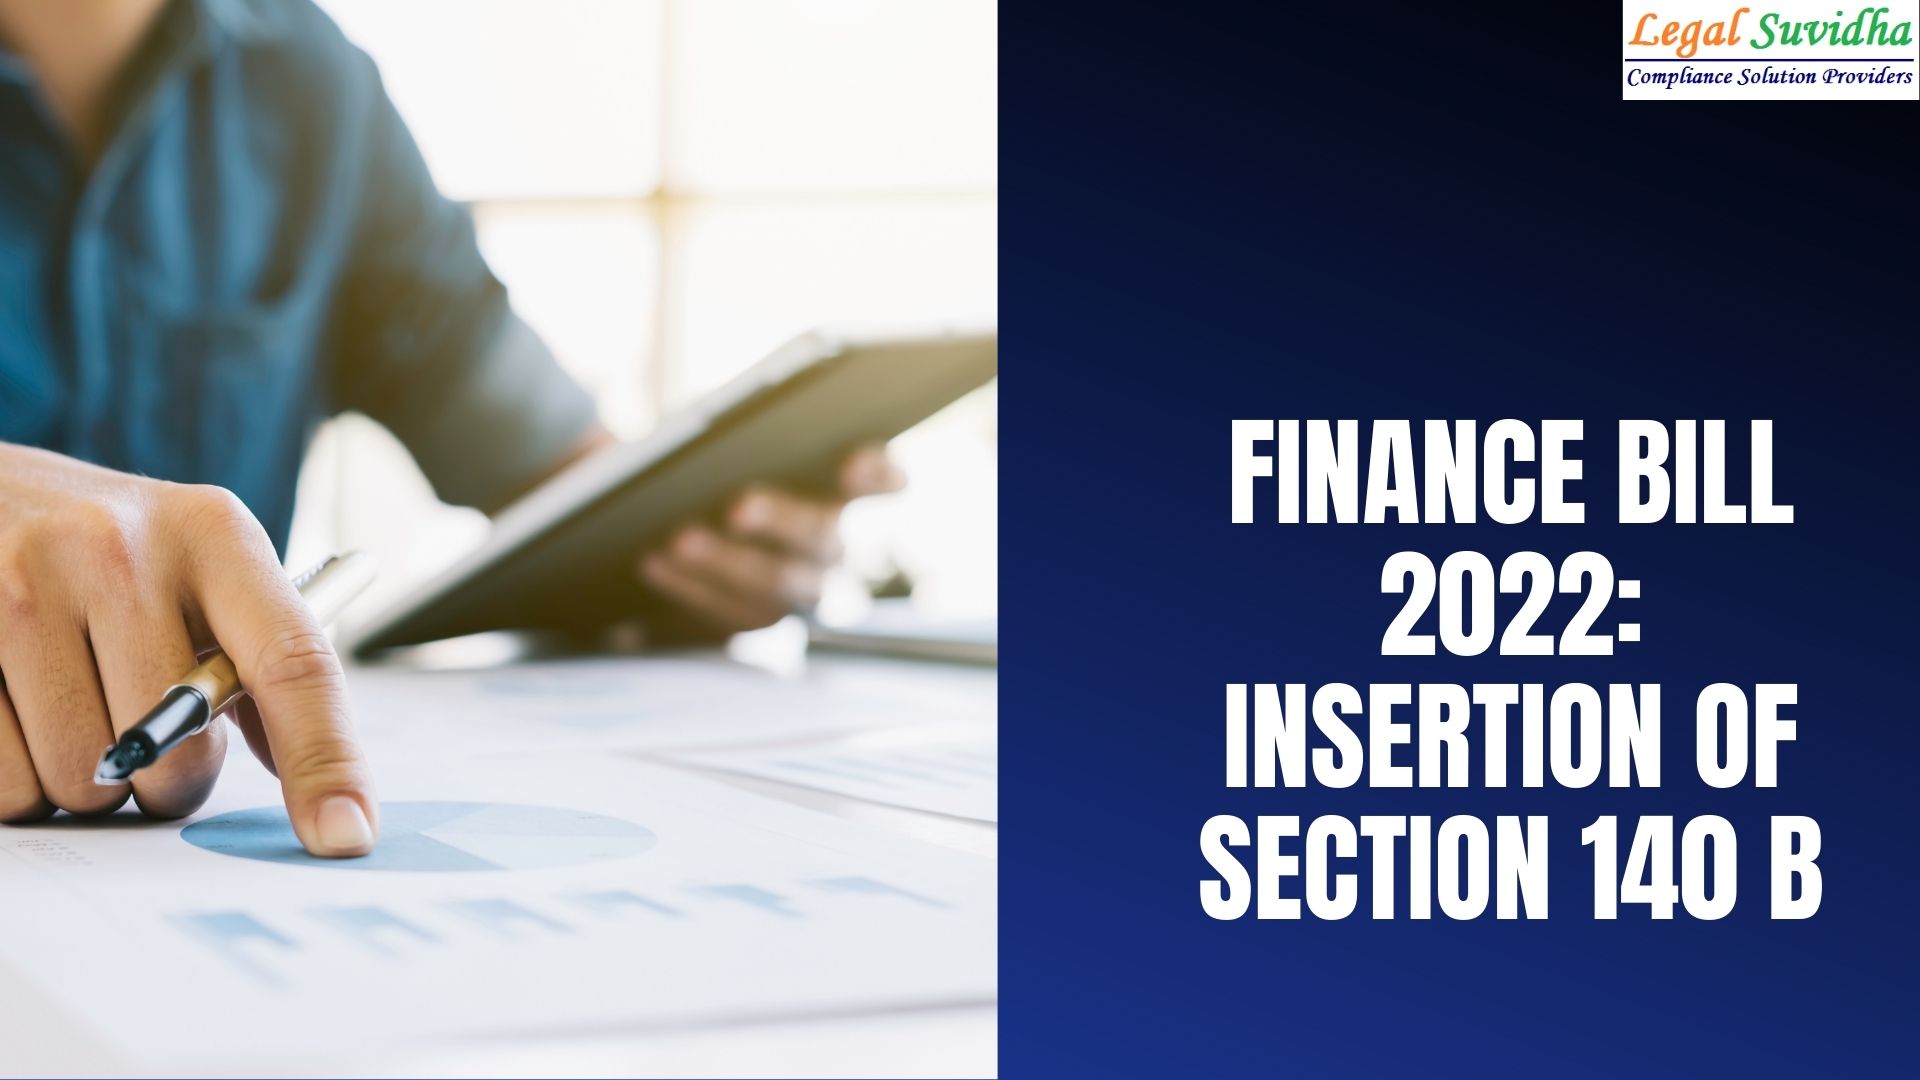 Insertion of new section 140B